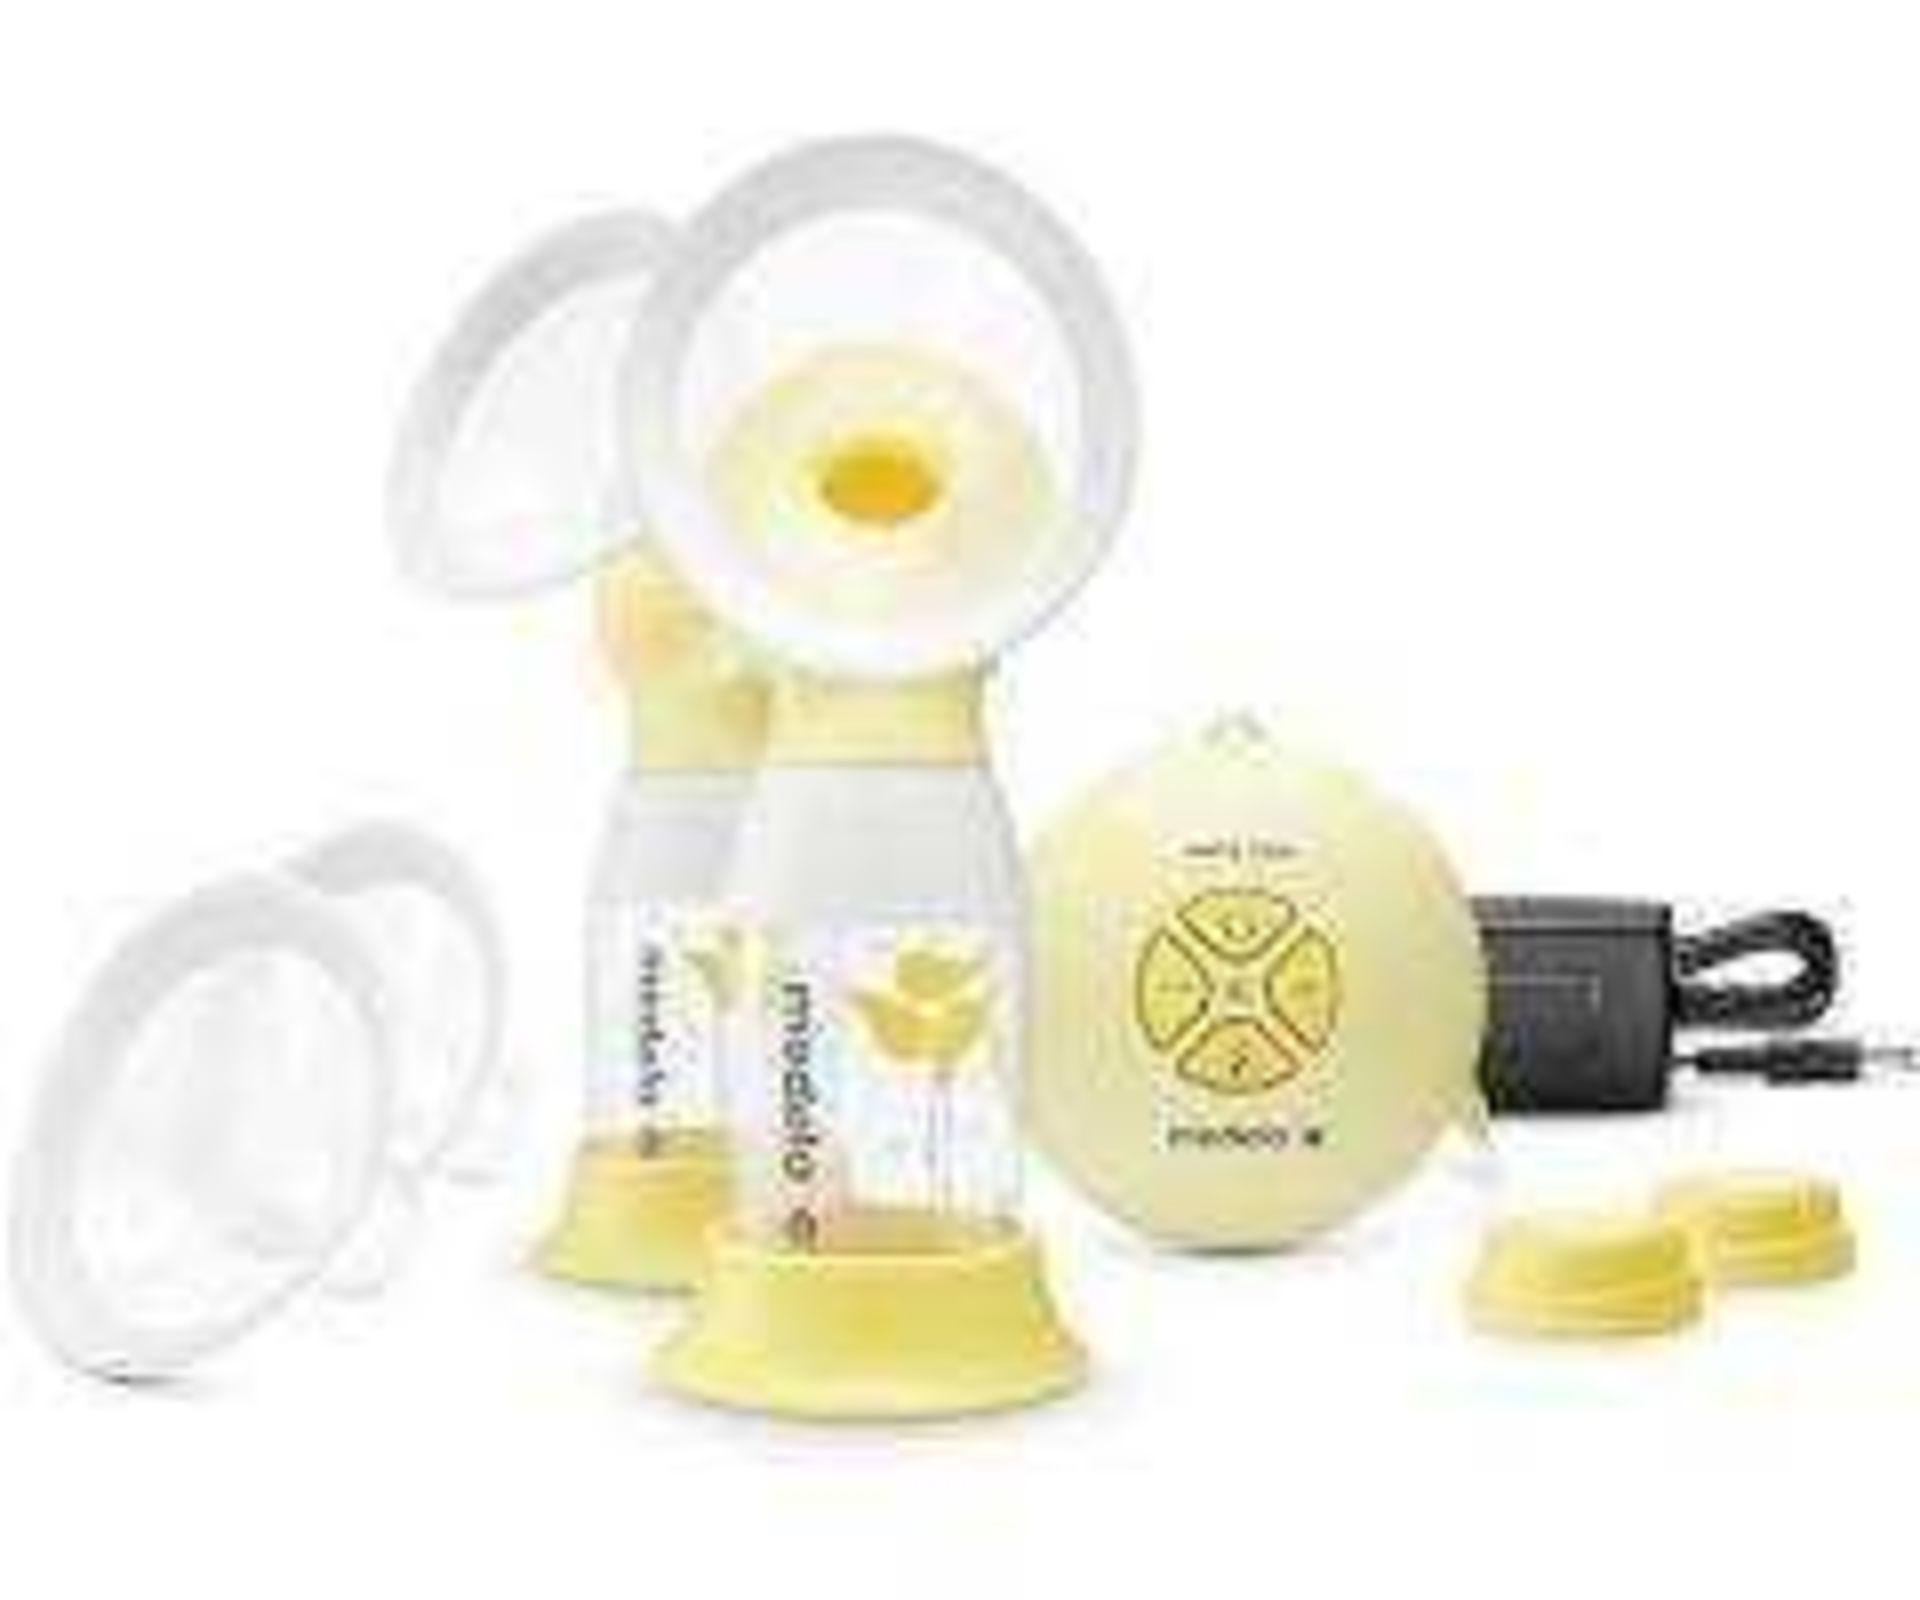 RRP £170 Boxed Medela Swing Maxi Double Electric 2 Faced Breast Pump (1198108) (Appraisals Available